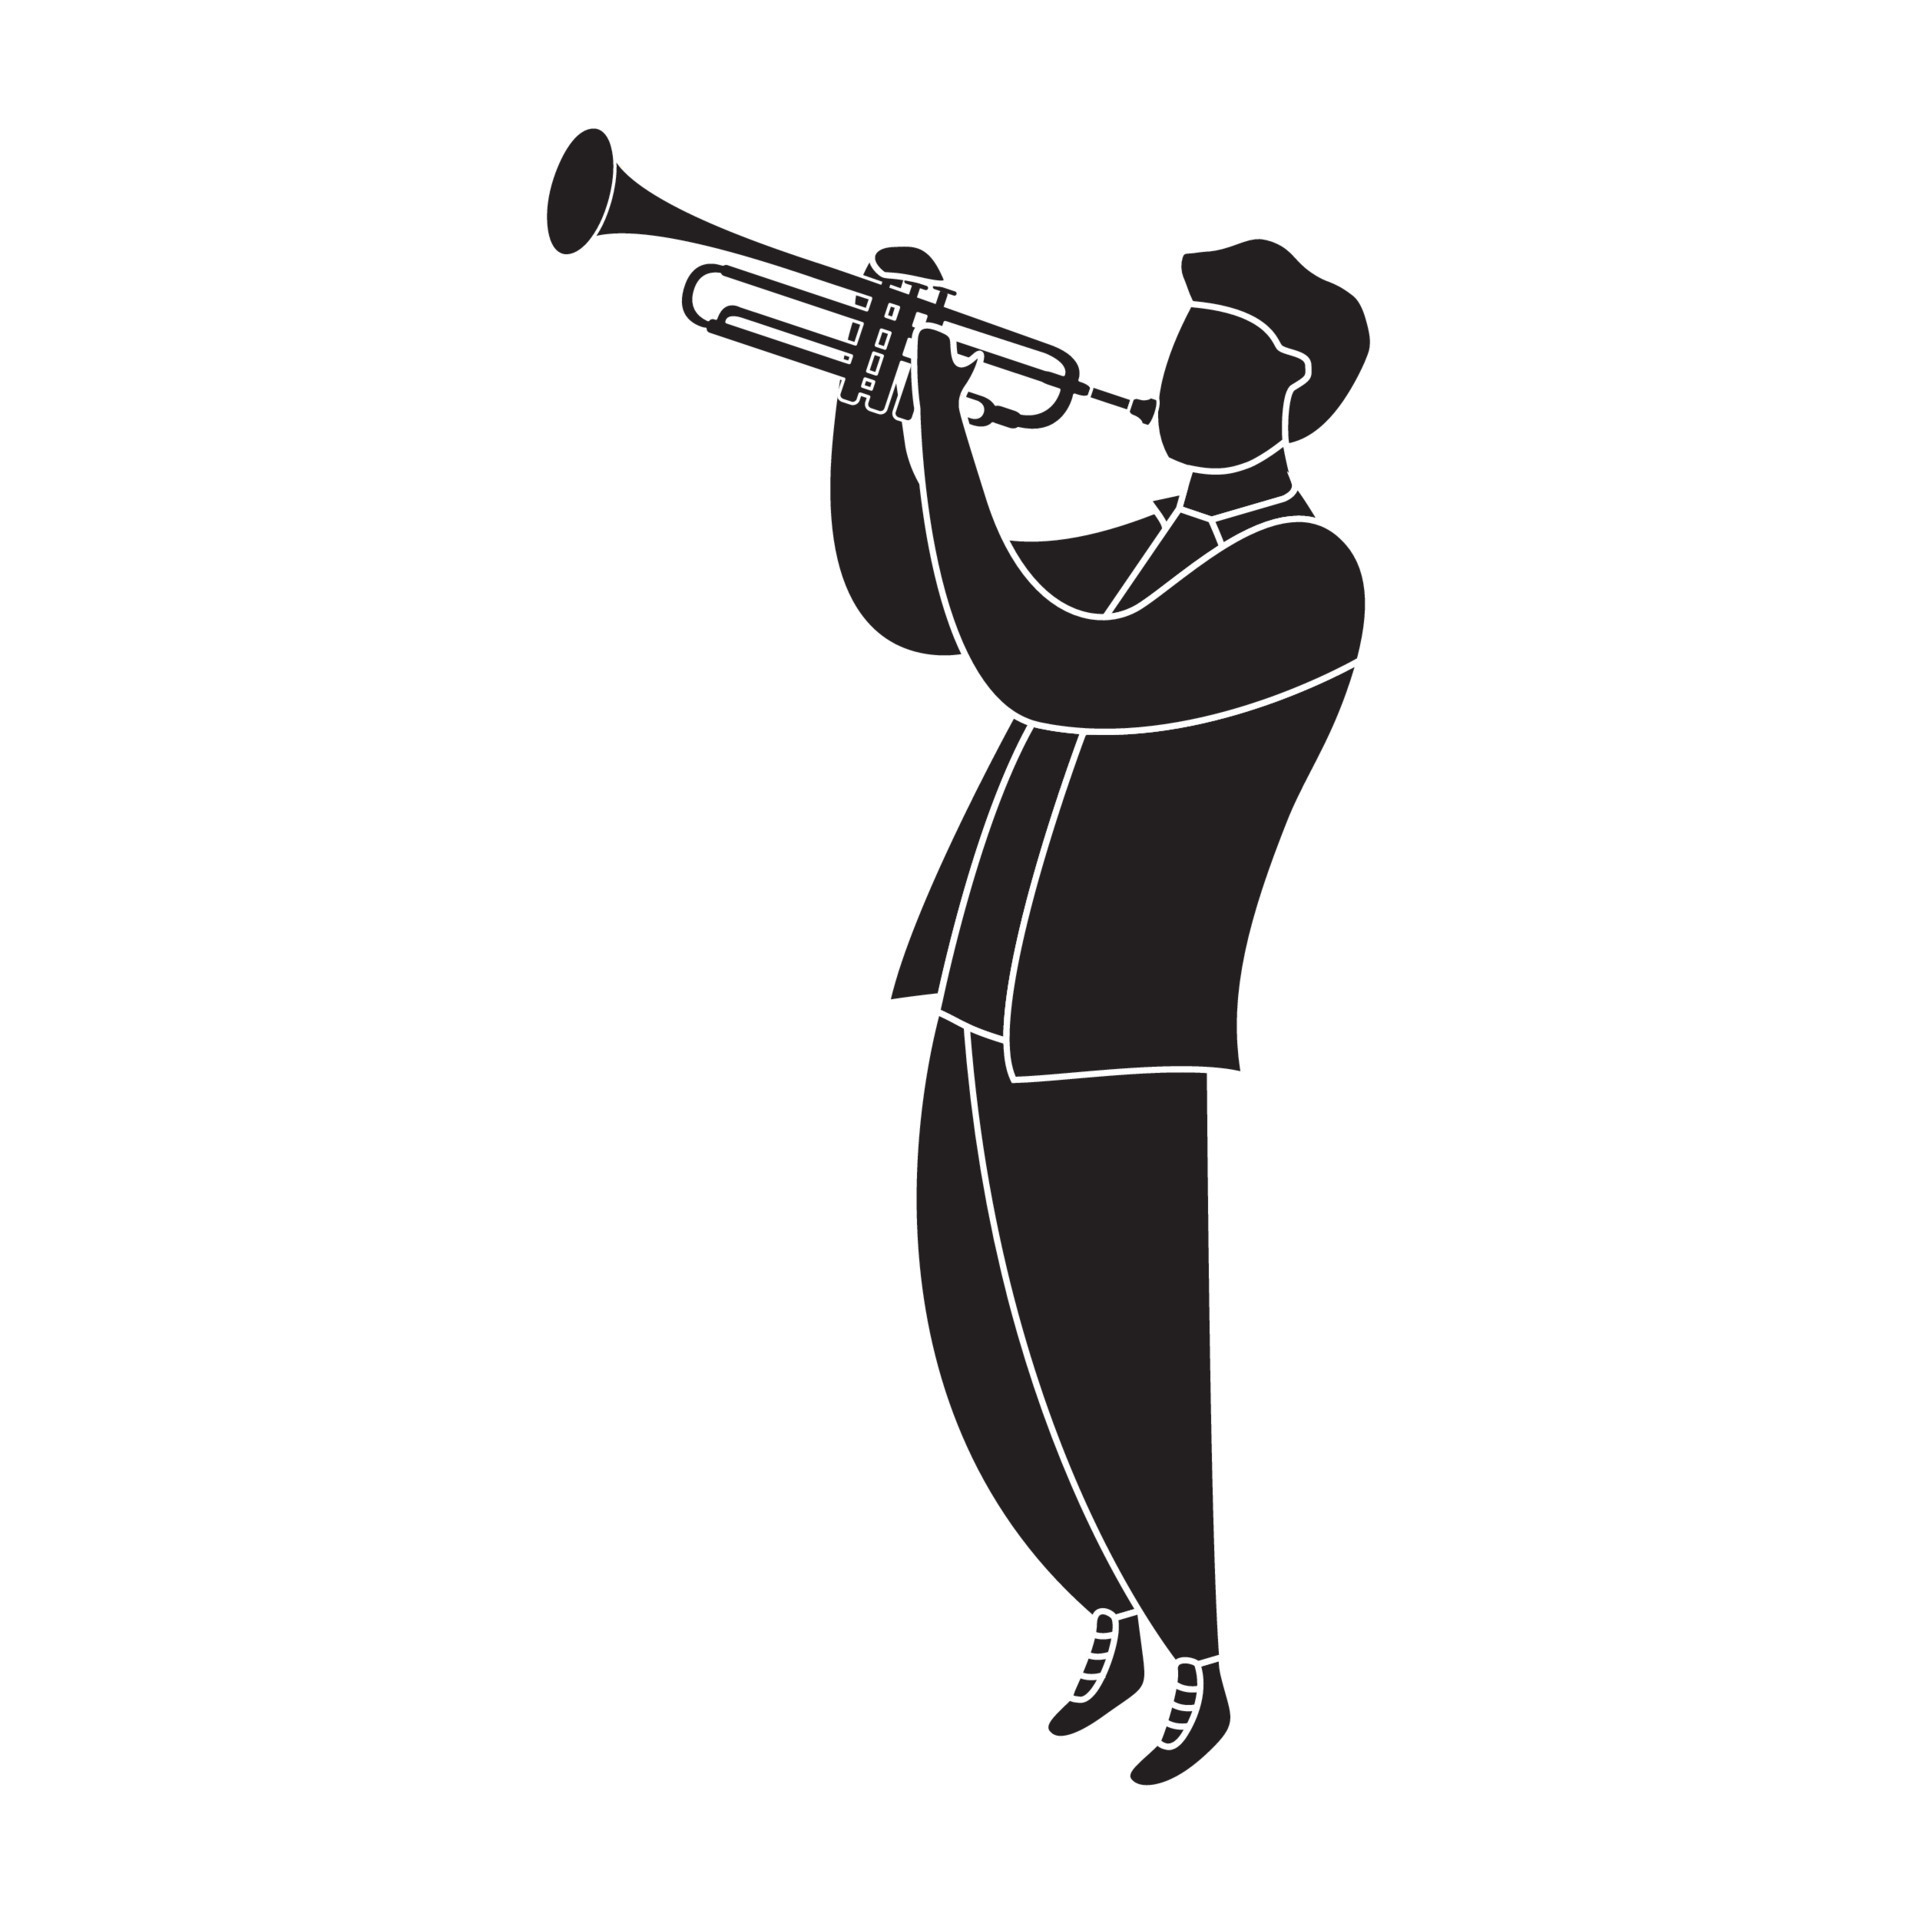 https://static.vecteezy.com/system/resources/previews/012/522/989/original/the-black-silhouette-man-musician-plays-the-trumpet-modern-flat-illustration-black-silhouette-character-isolated-on-white-background-vector.jpg